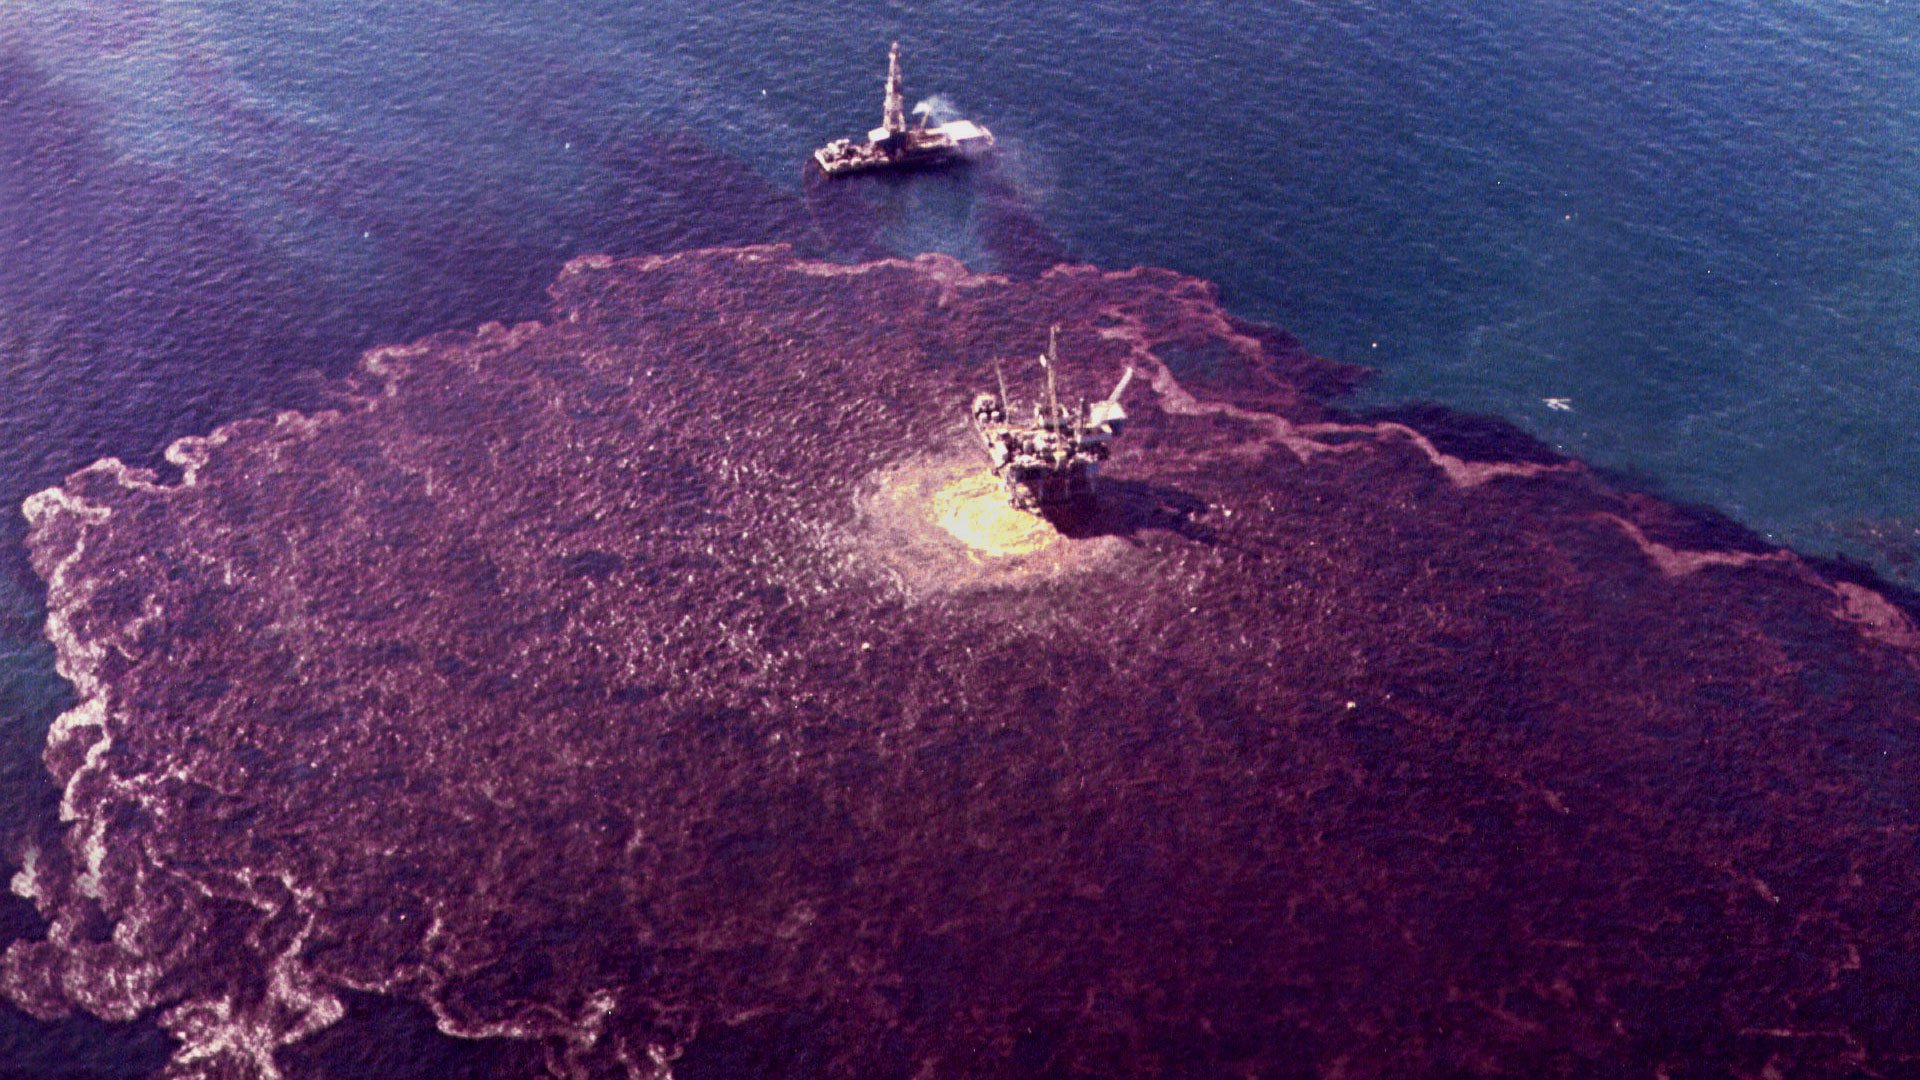 Aerial view of a spill from an offshore oil rig off the coast of Santa Barbara, California in 1969.